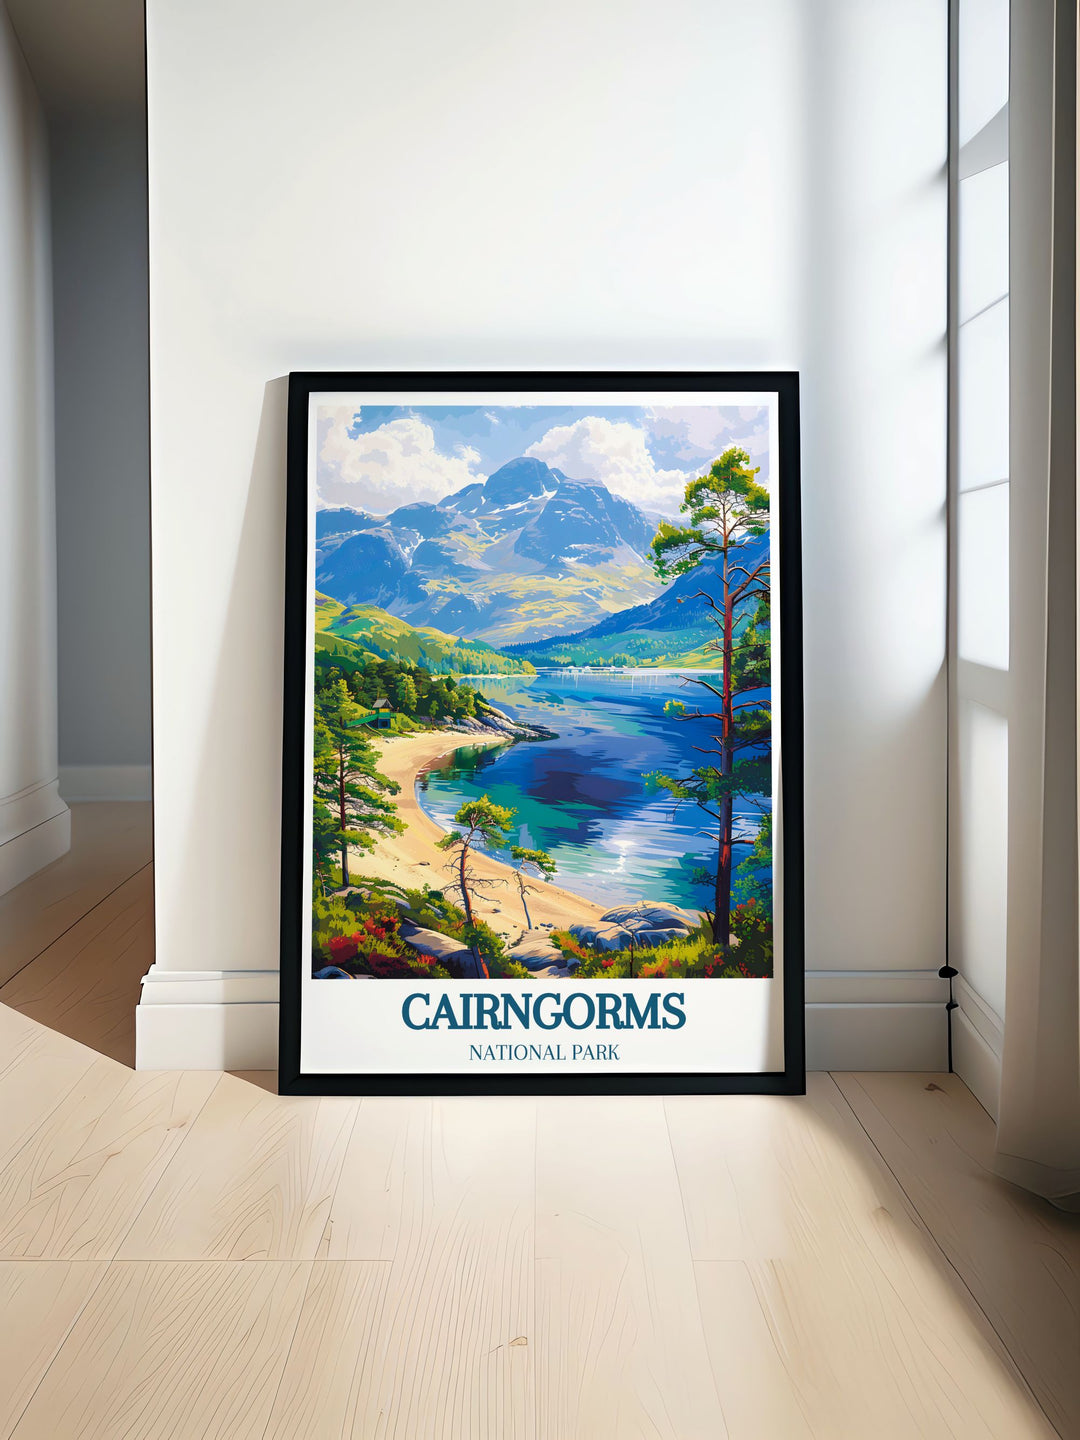 This travel poster captures the scenic beauty of Cairngorms National Park and the majestic Cairngorm Mountain, perfect for adding a touch of Scotlands natural splendor to your home decor.